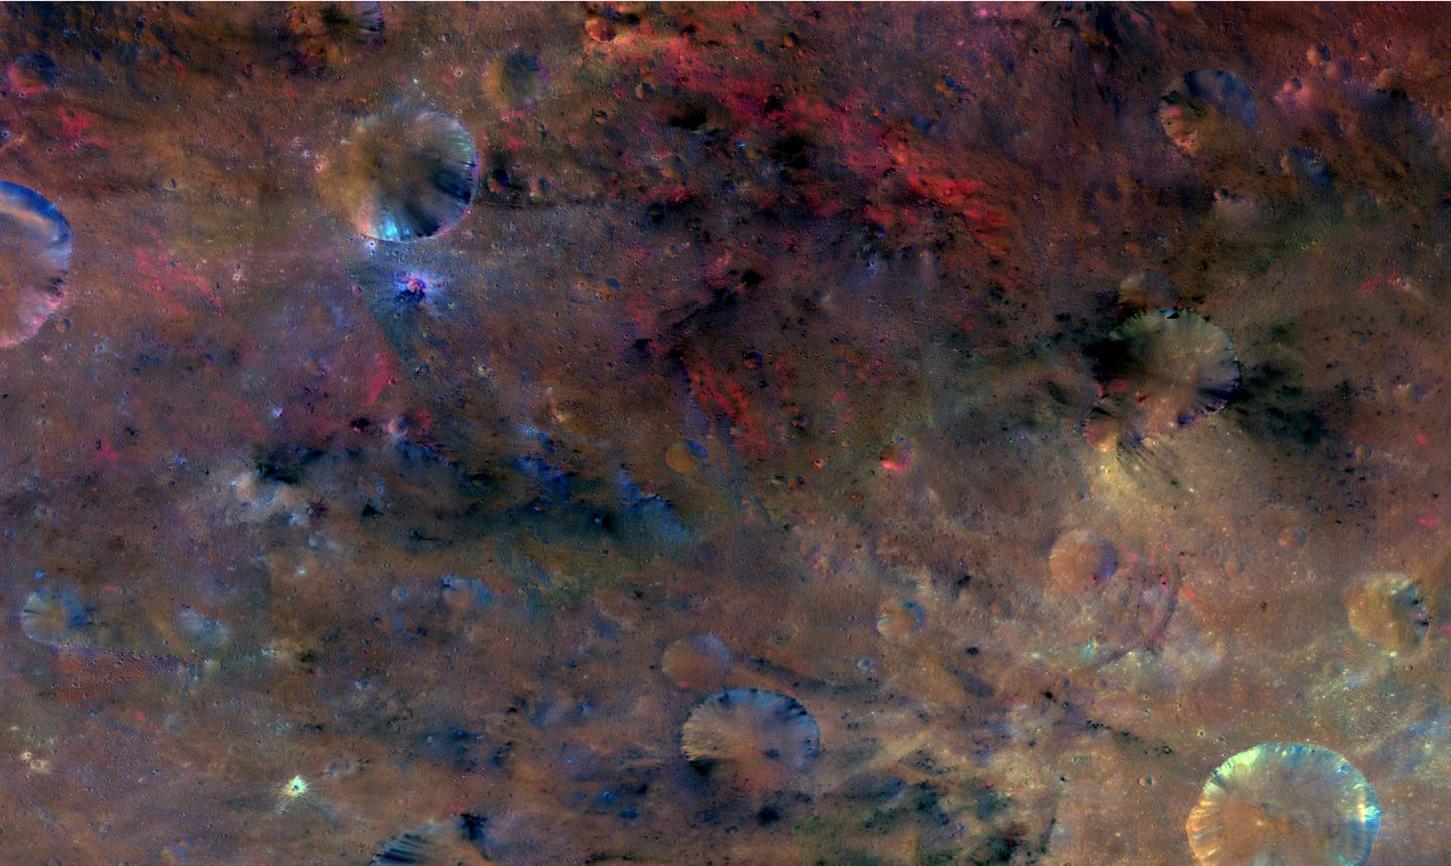 This colorful image from NASA's Dawn mission shows material northwest of the crater Sextilia on the giant asteroid Vesta. Sextilia, located around 30 degrees south latitude, is at the bottom right of this image.